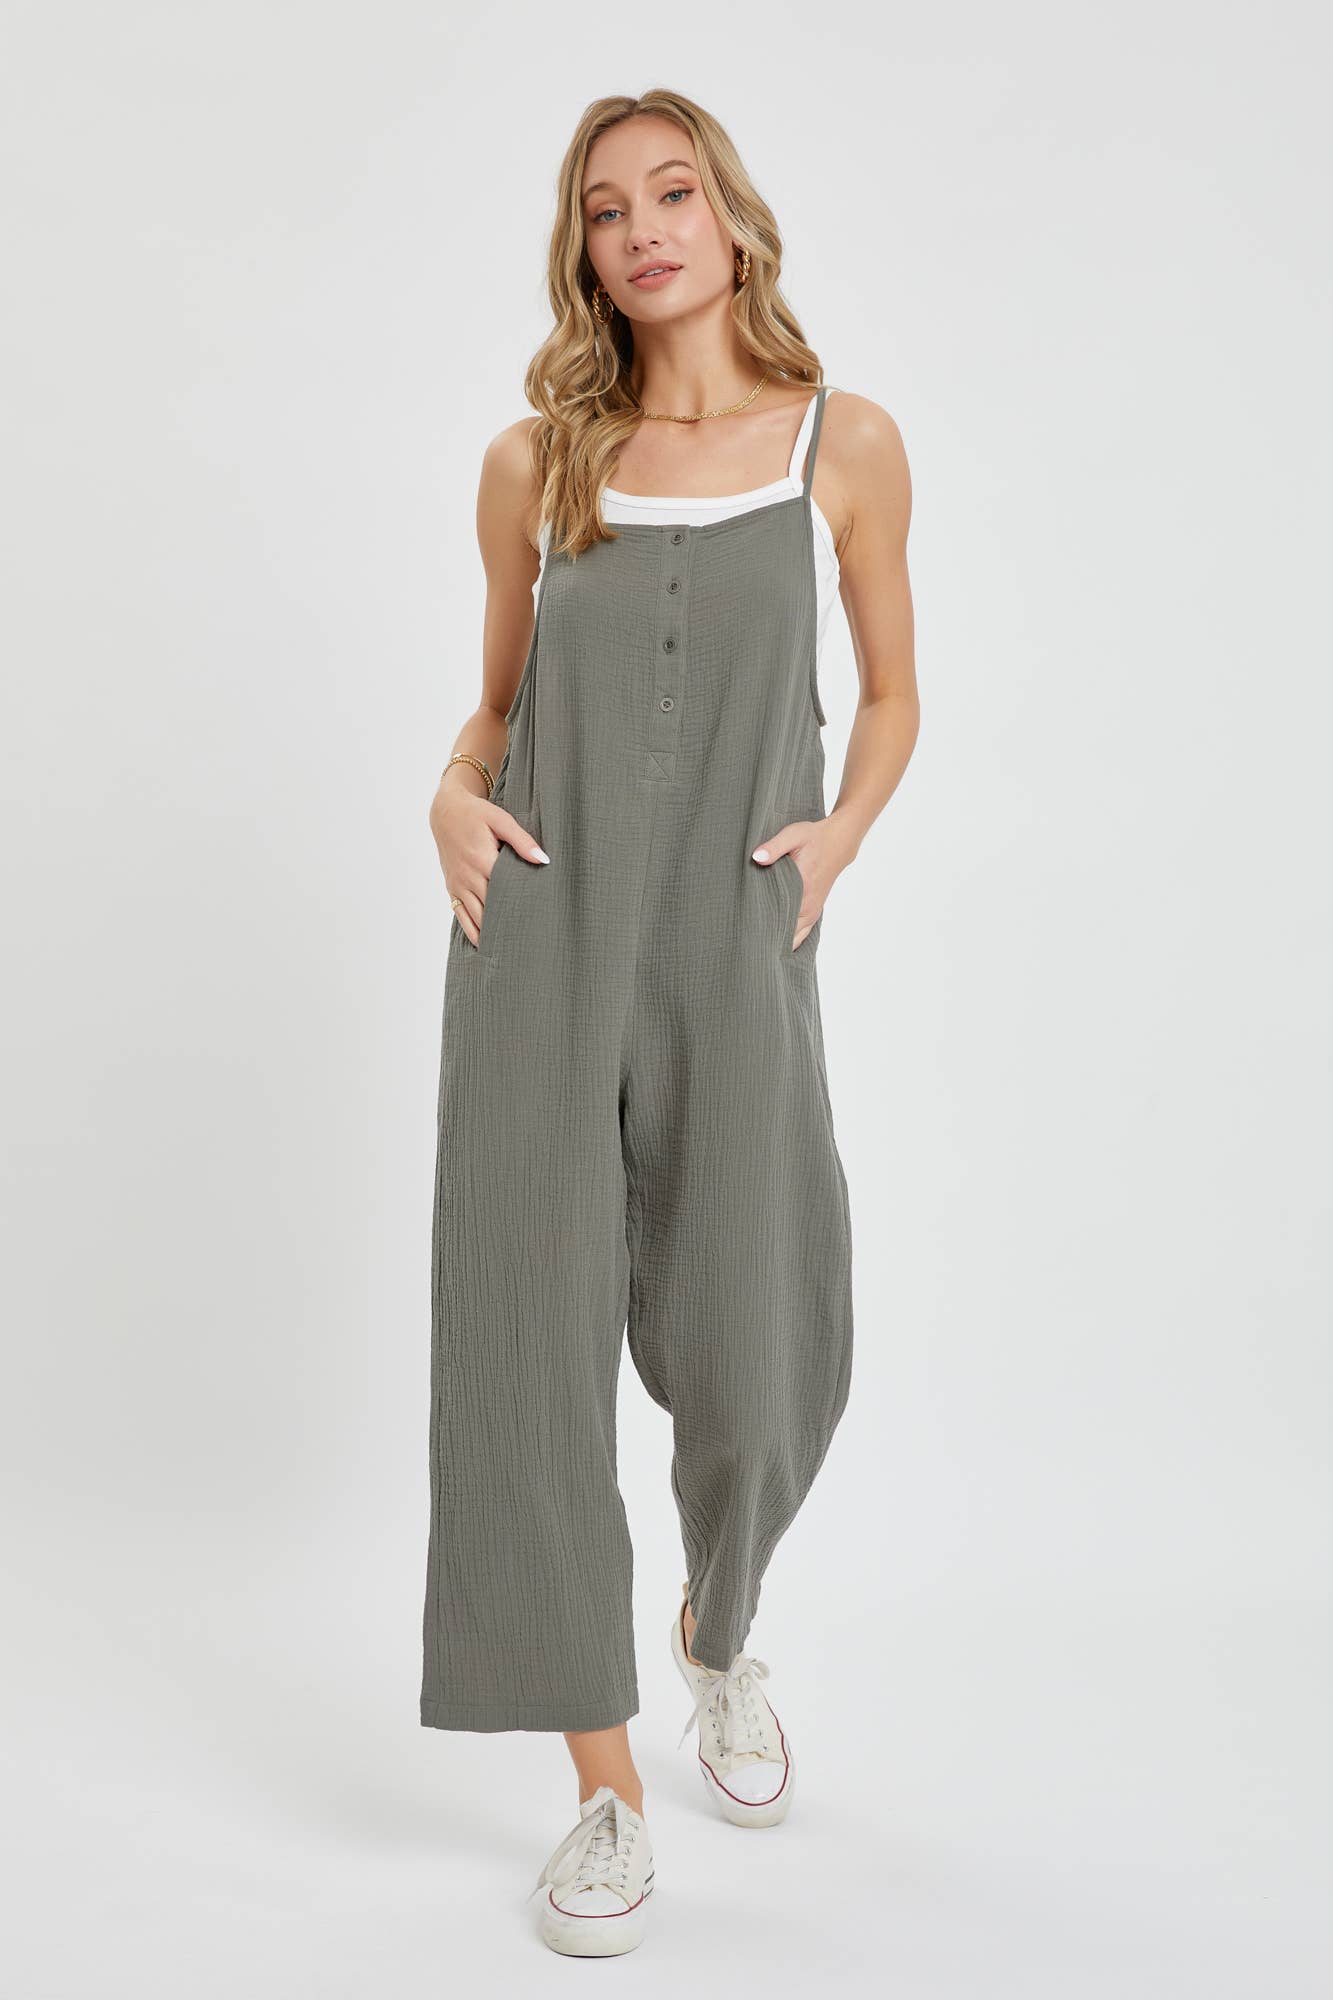 COTTON GAUZE SLEEVELESS JUMPSUIT IN OLIVE Spring-Summer Sweet Lovely by Jen